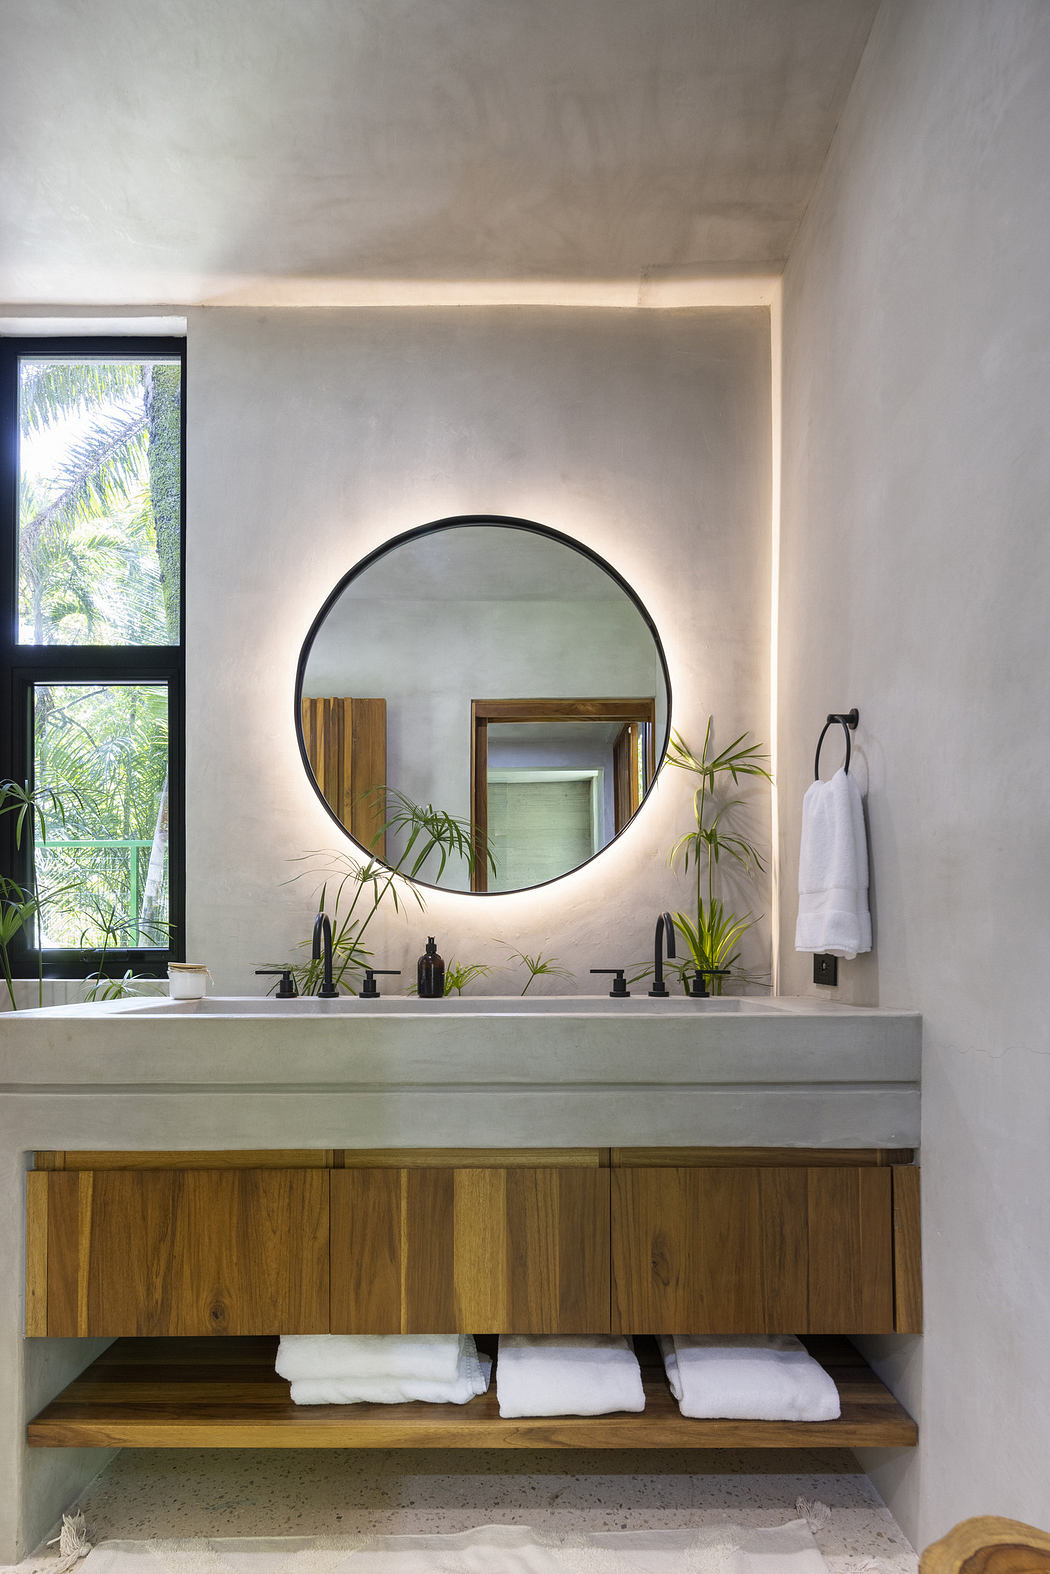 Modern bathroom with round mirror, wooden vanity, and white towels.